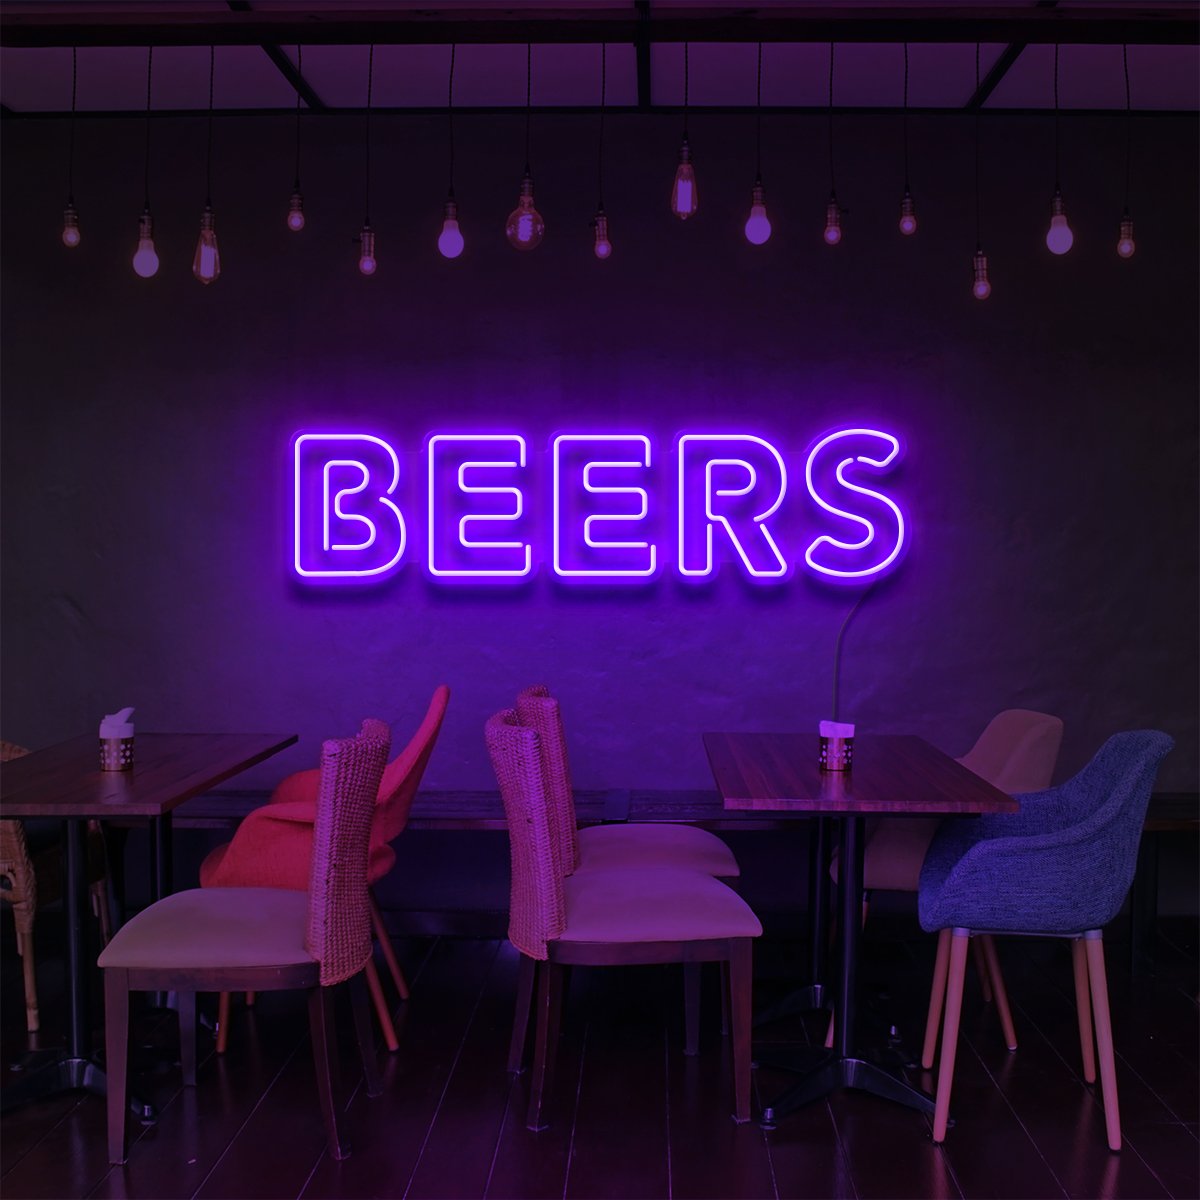 "Beers" Neon Sign for Bars & Restaurants 60cm (2ft) / Purple / LED Neon by Neon Icons